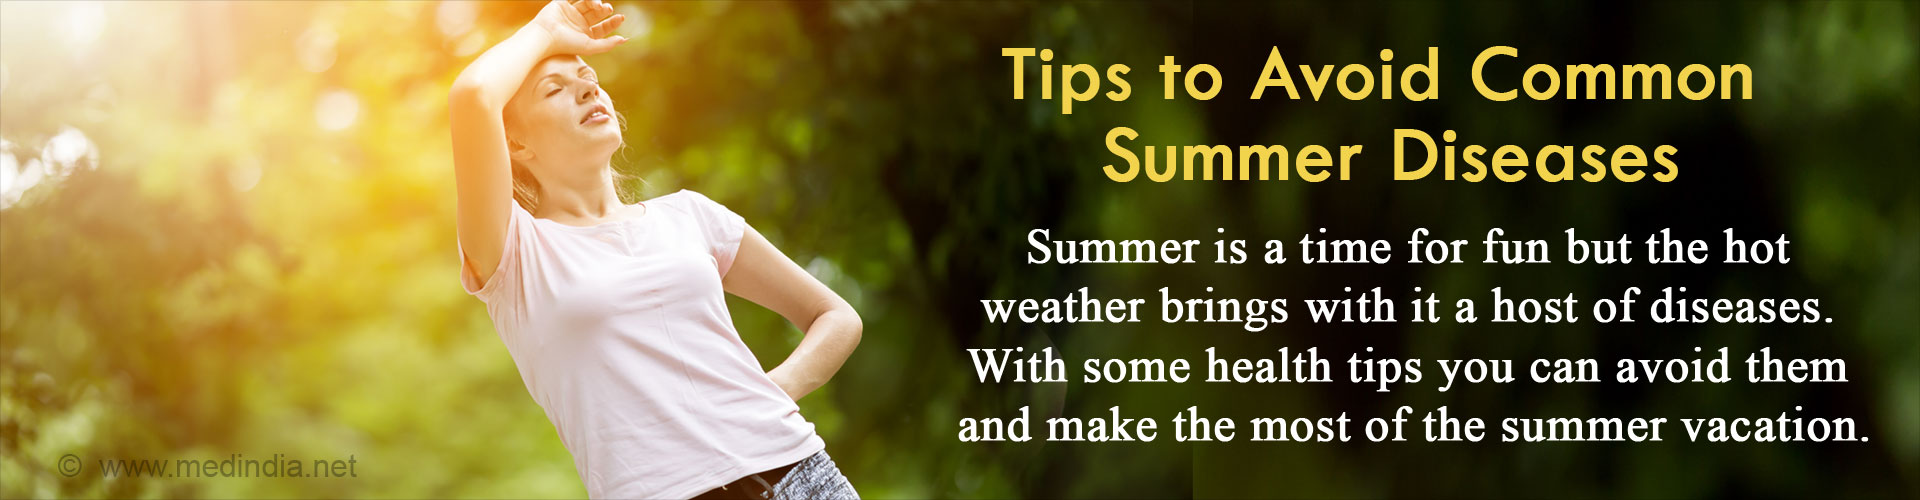 Tips to avoid common summer diseases: Summer is a time of fun, but the hot waether brings with it a host of diseases. With some health tips, you can avoid them and make the most of the summer vacation